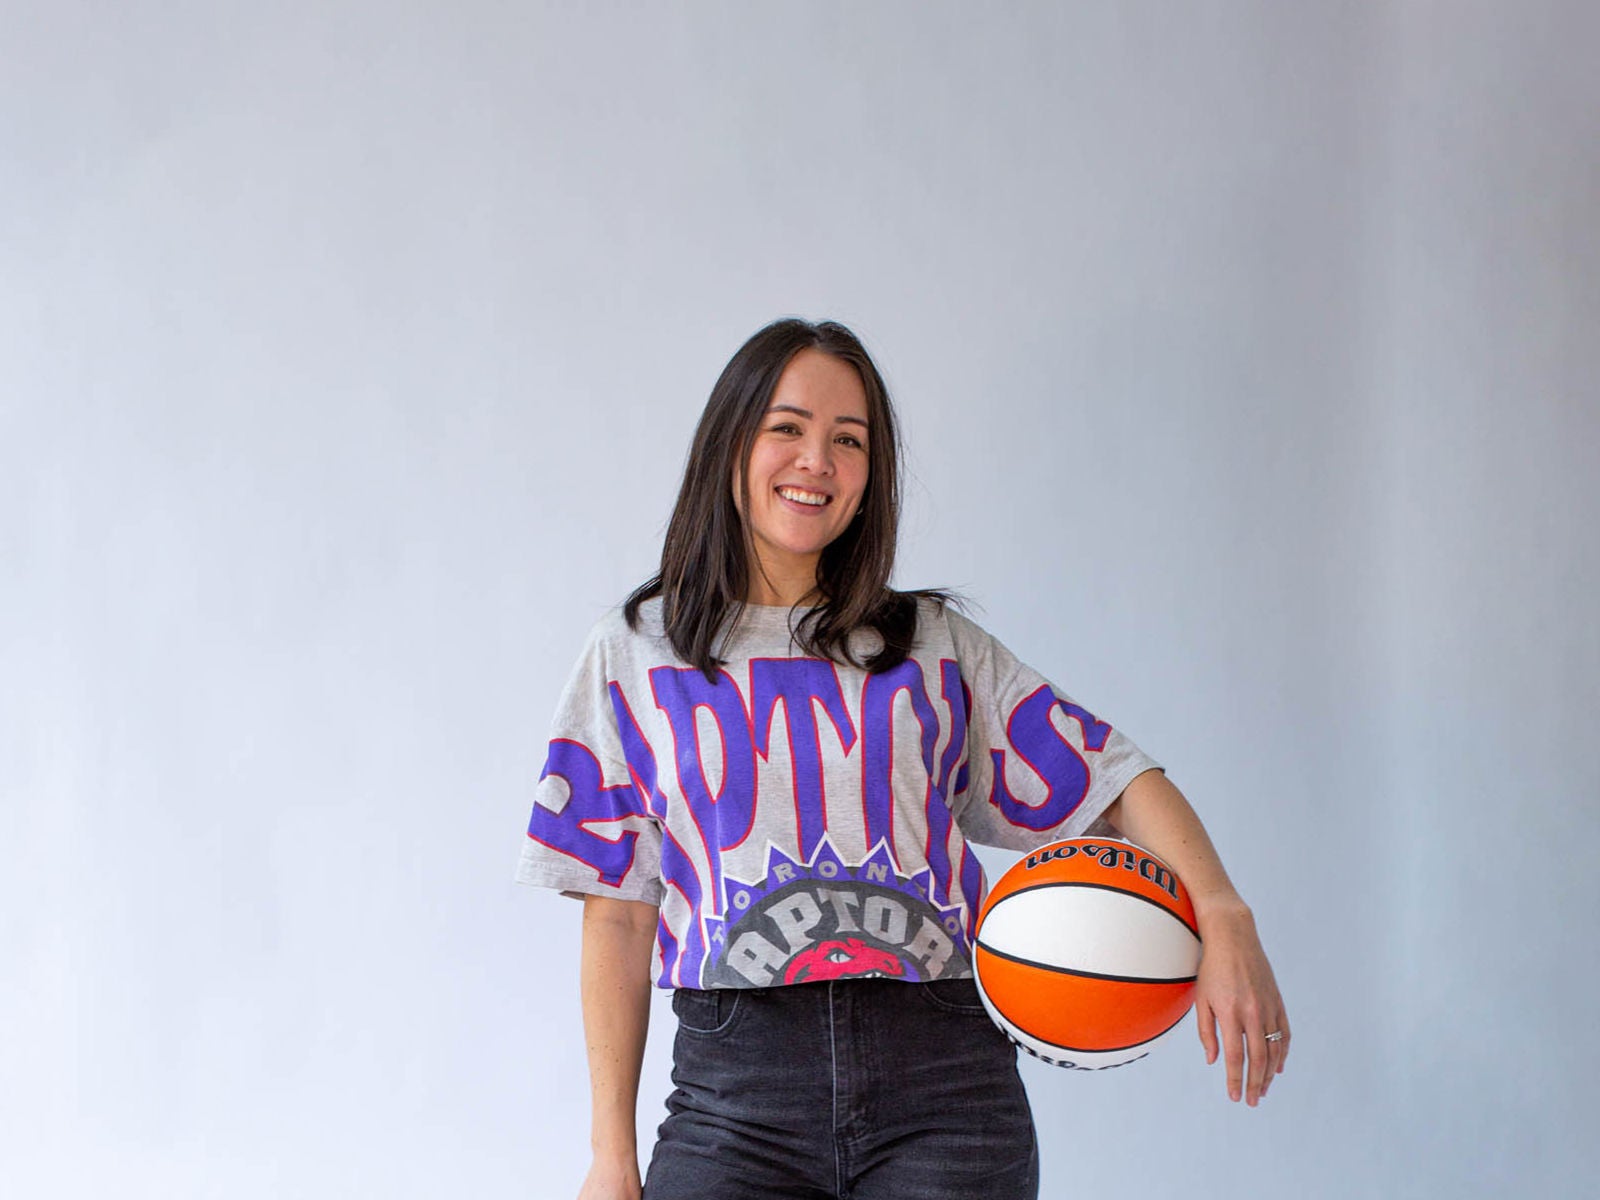 Jacie deHoop, cofounder of The Gist, posing with a Toronto Raptors top and a basketball at her hip.